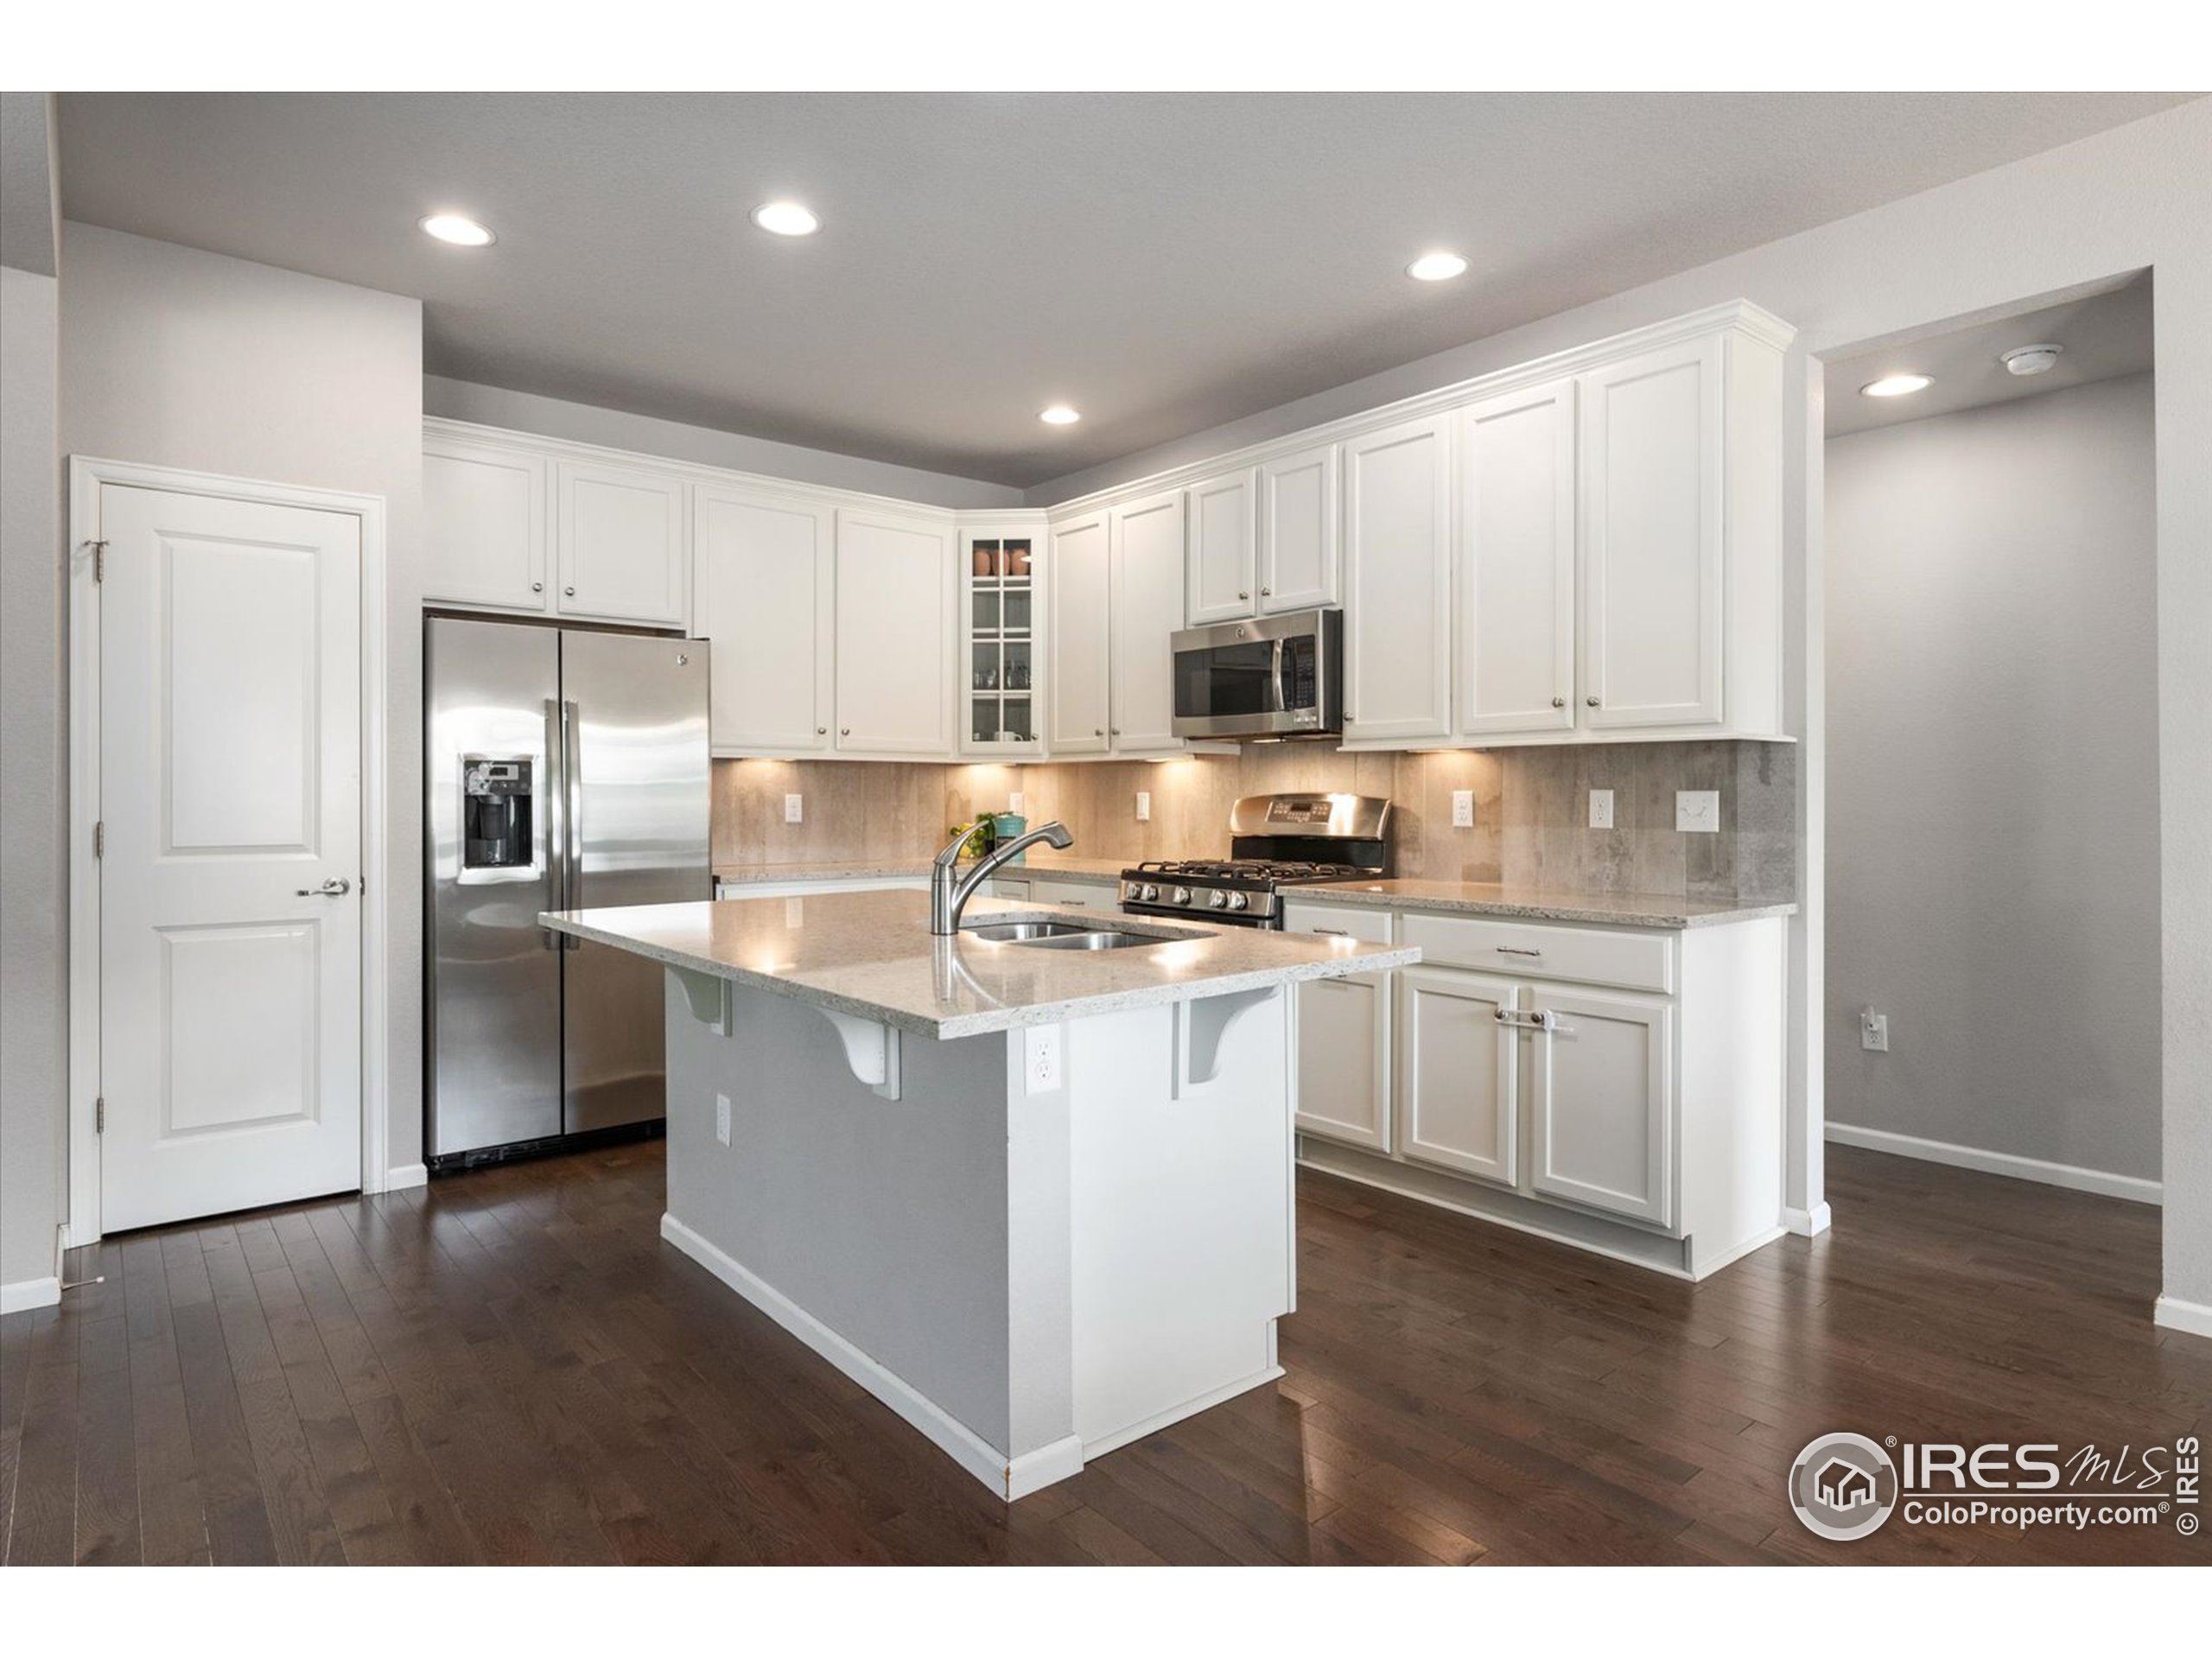 a kitchen with kitchen island granite countertop stainless steel appliances refrigerator sink and microwave